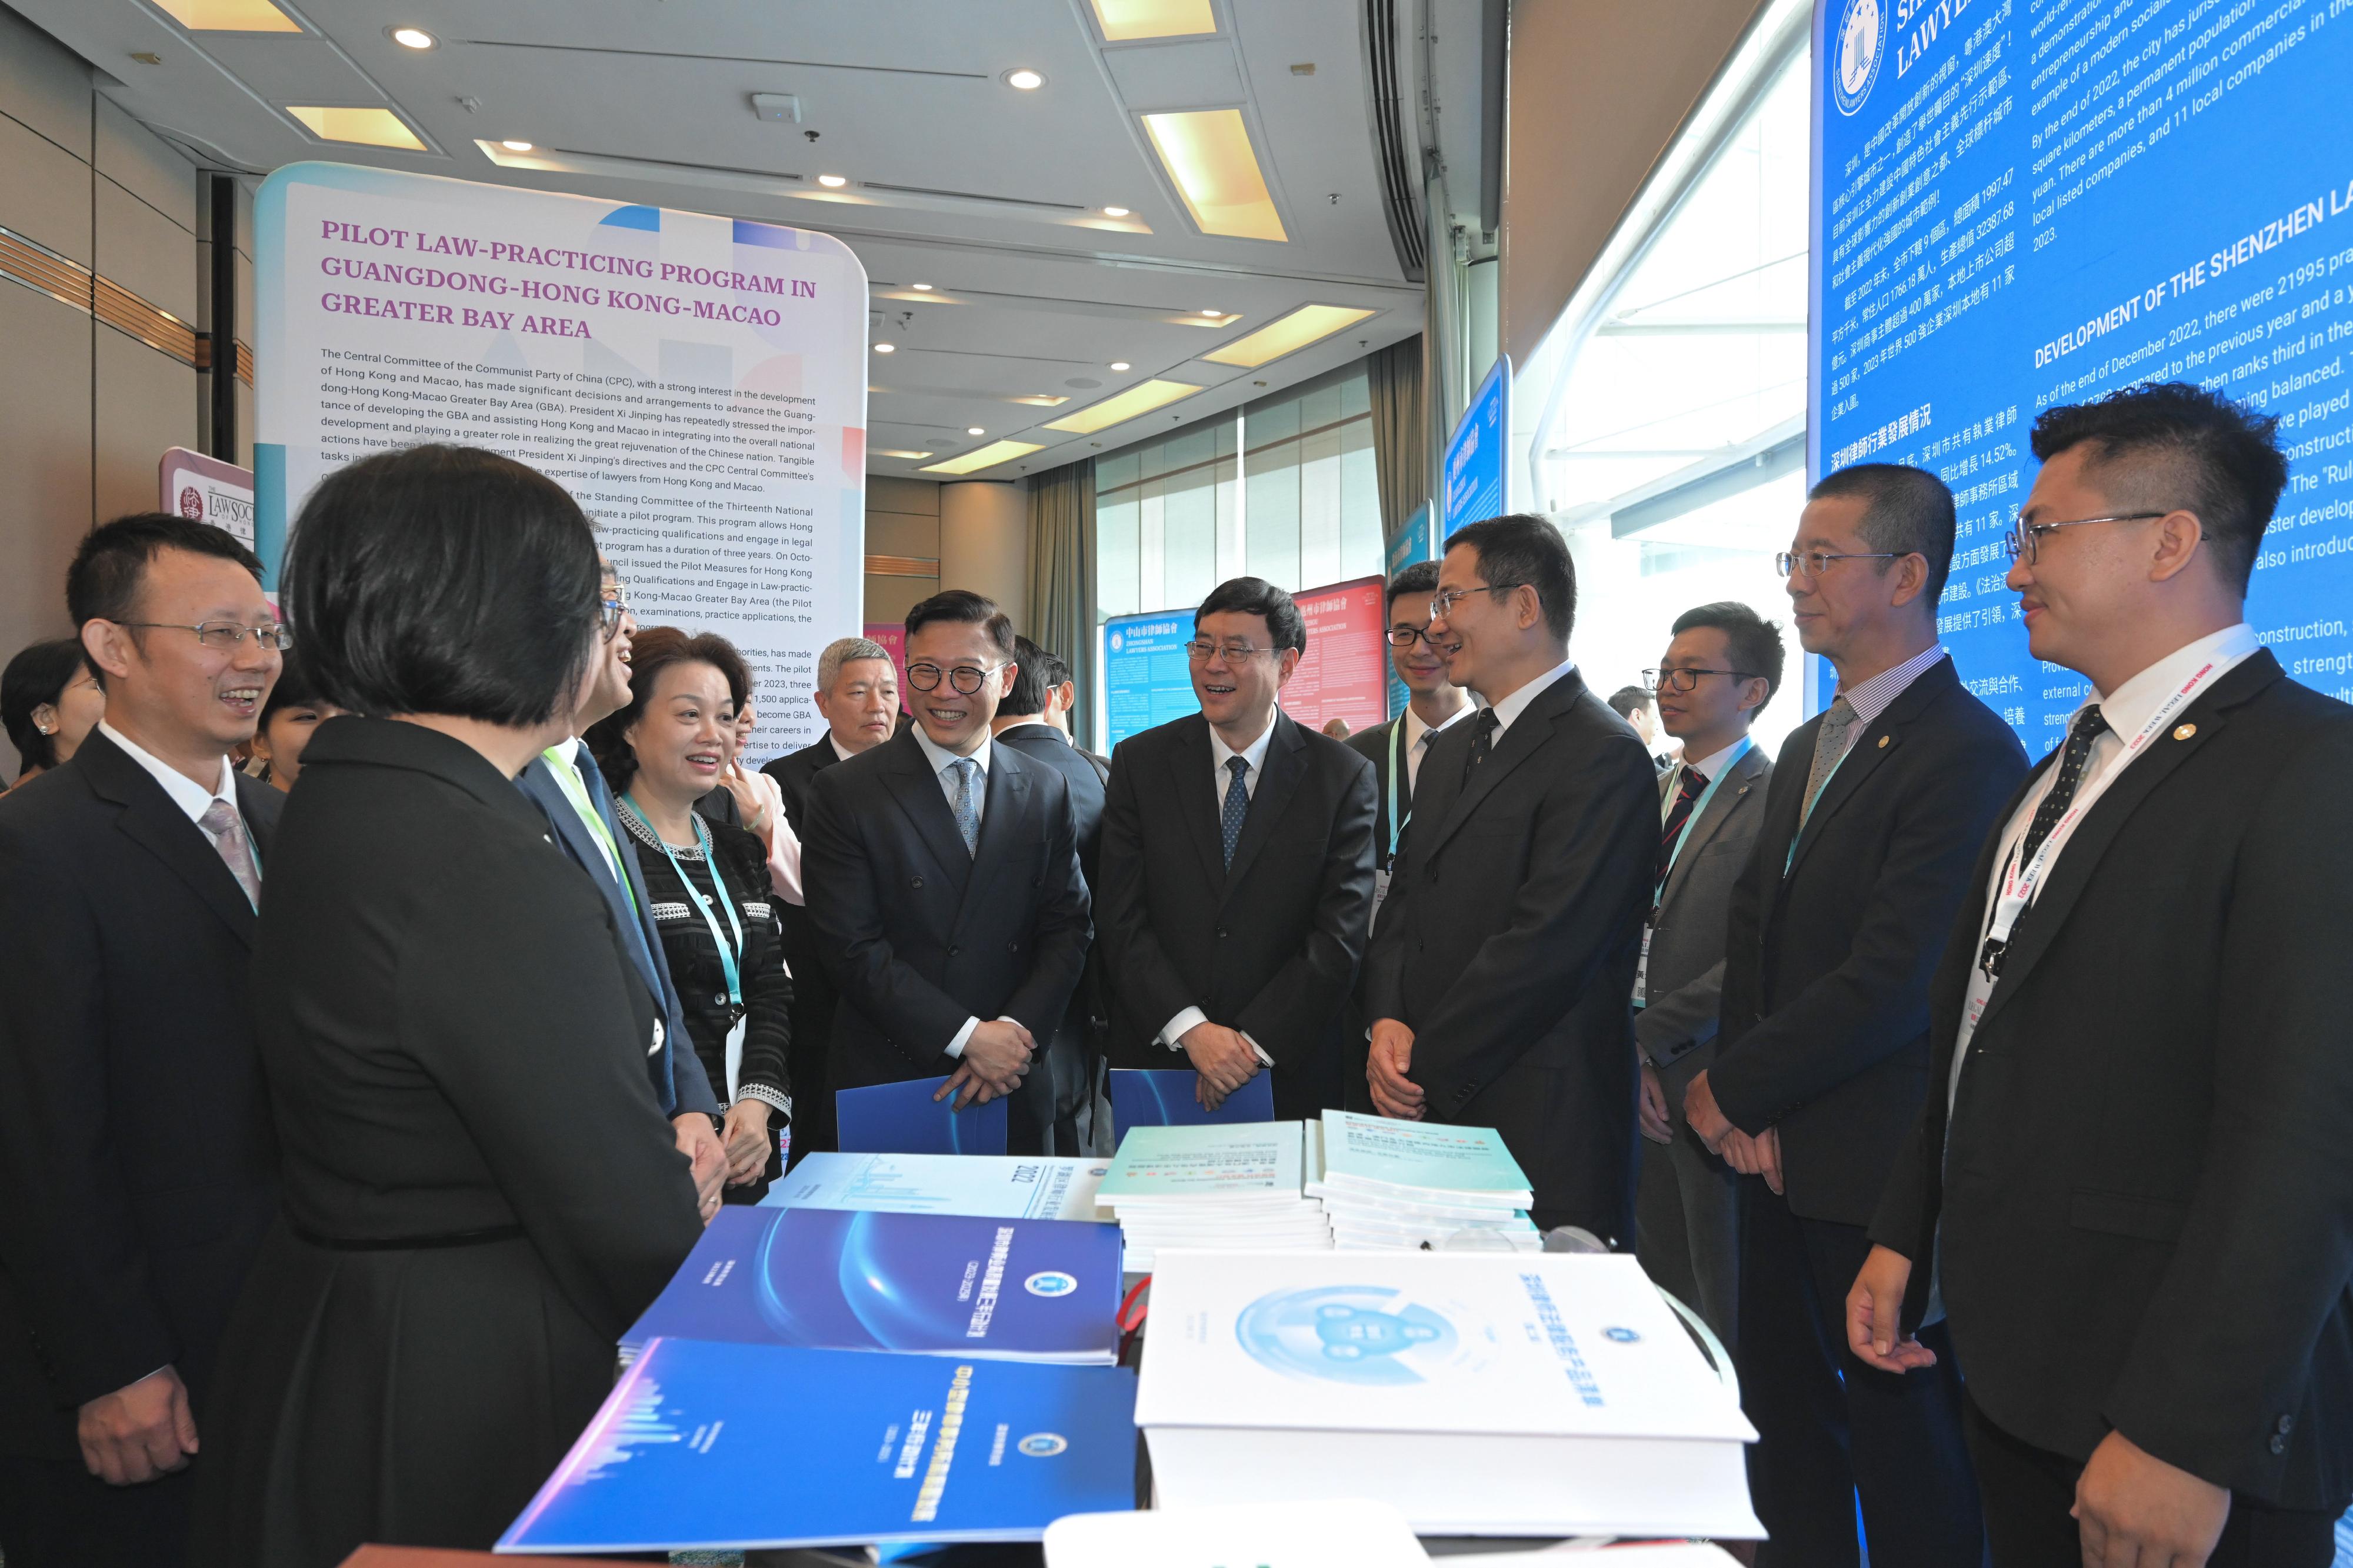 The Deputy Secretary for Justice, Mr Cheung Kwok-kwan (seventh right); the Director-General of the Department of Justice of Guangdong Province, Mr Chen Xudong (sixth right); and the Director of the Bureau of Lawyers' Work of the Ministry of Justice, Mr Tian Xin (fourth right), visit exhibition booths dedicated to promoting legal services set up at the Hong Kong Legal Week 2023 today (November 9), and chat with representatives from Hong Kong, Macao and the nine Mainland cities in the Guangdong-Hong Kong-Macao Greater Bay Area .
